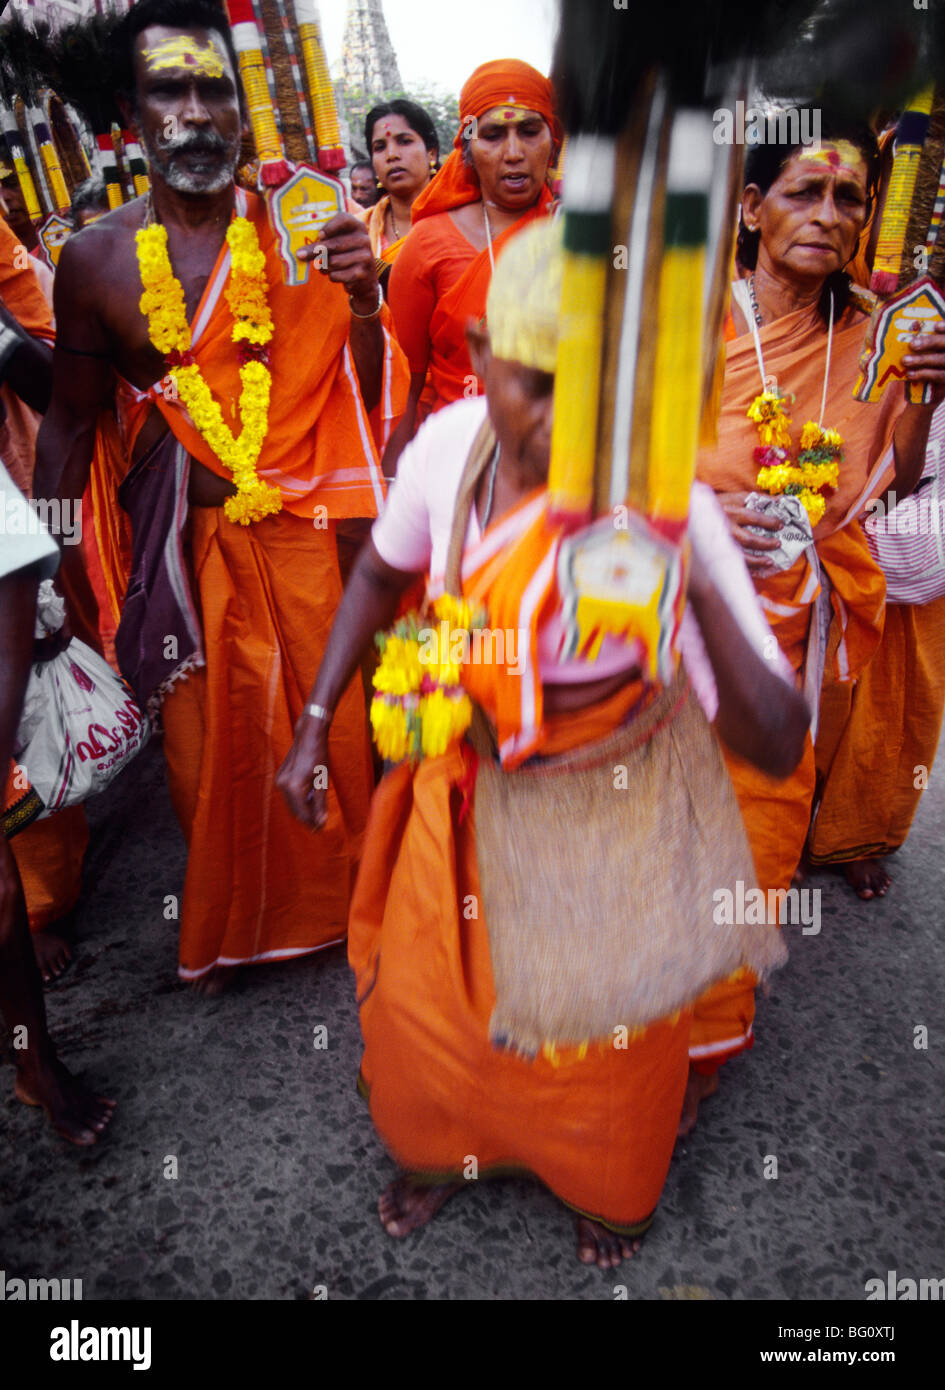 A group of orange robed devotees and pilgrims have come from a distant village and are dancing and singing their way through the streets of Palani in the south India state of Tamil Nadu during the annual Hindu Thaipusam festival. They are celebrating the youngest son of Shiva, Lord Murugan's birthday and will ultimately ascend the steps to his temple in Palani Stock Photo